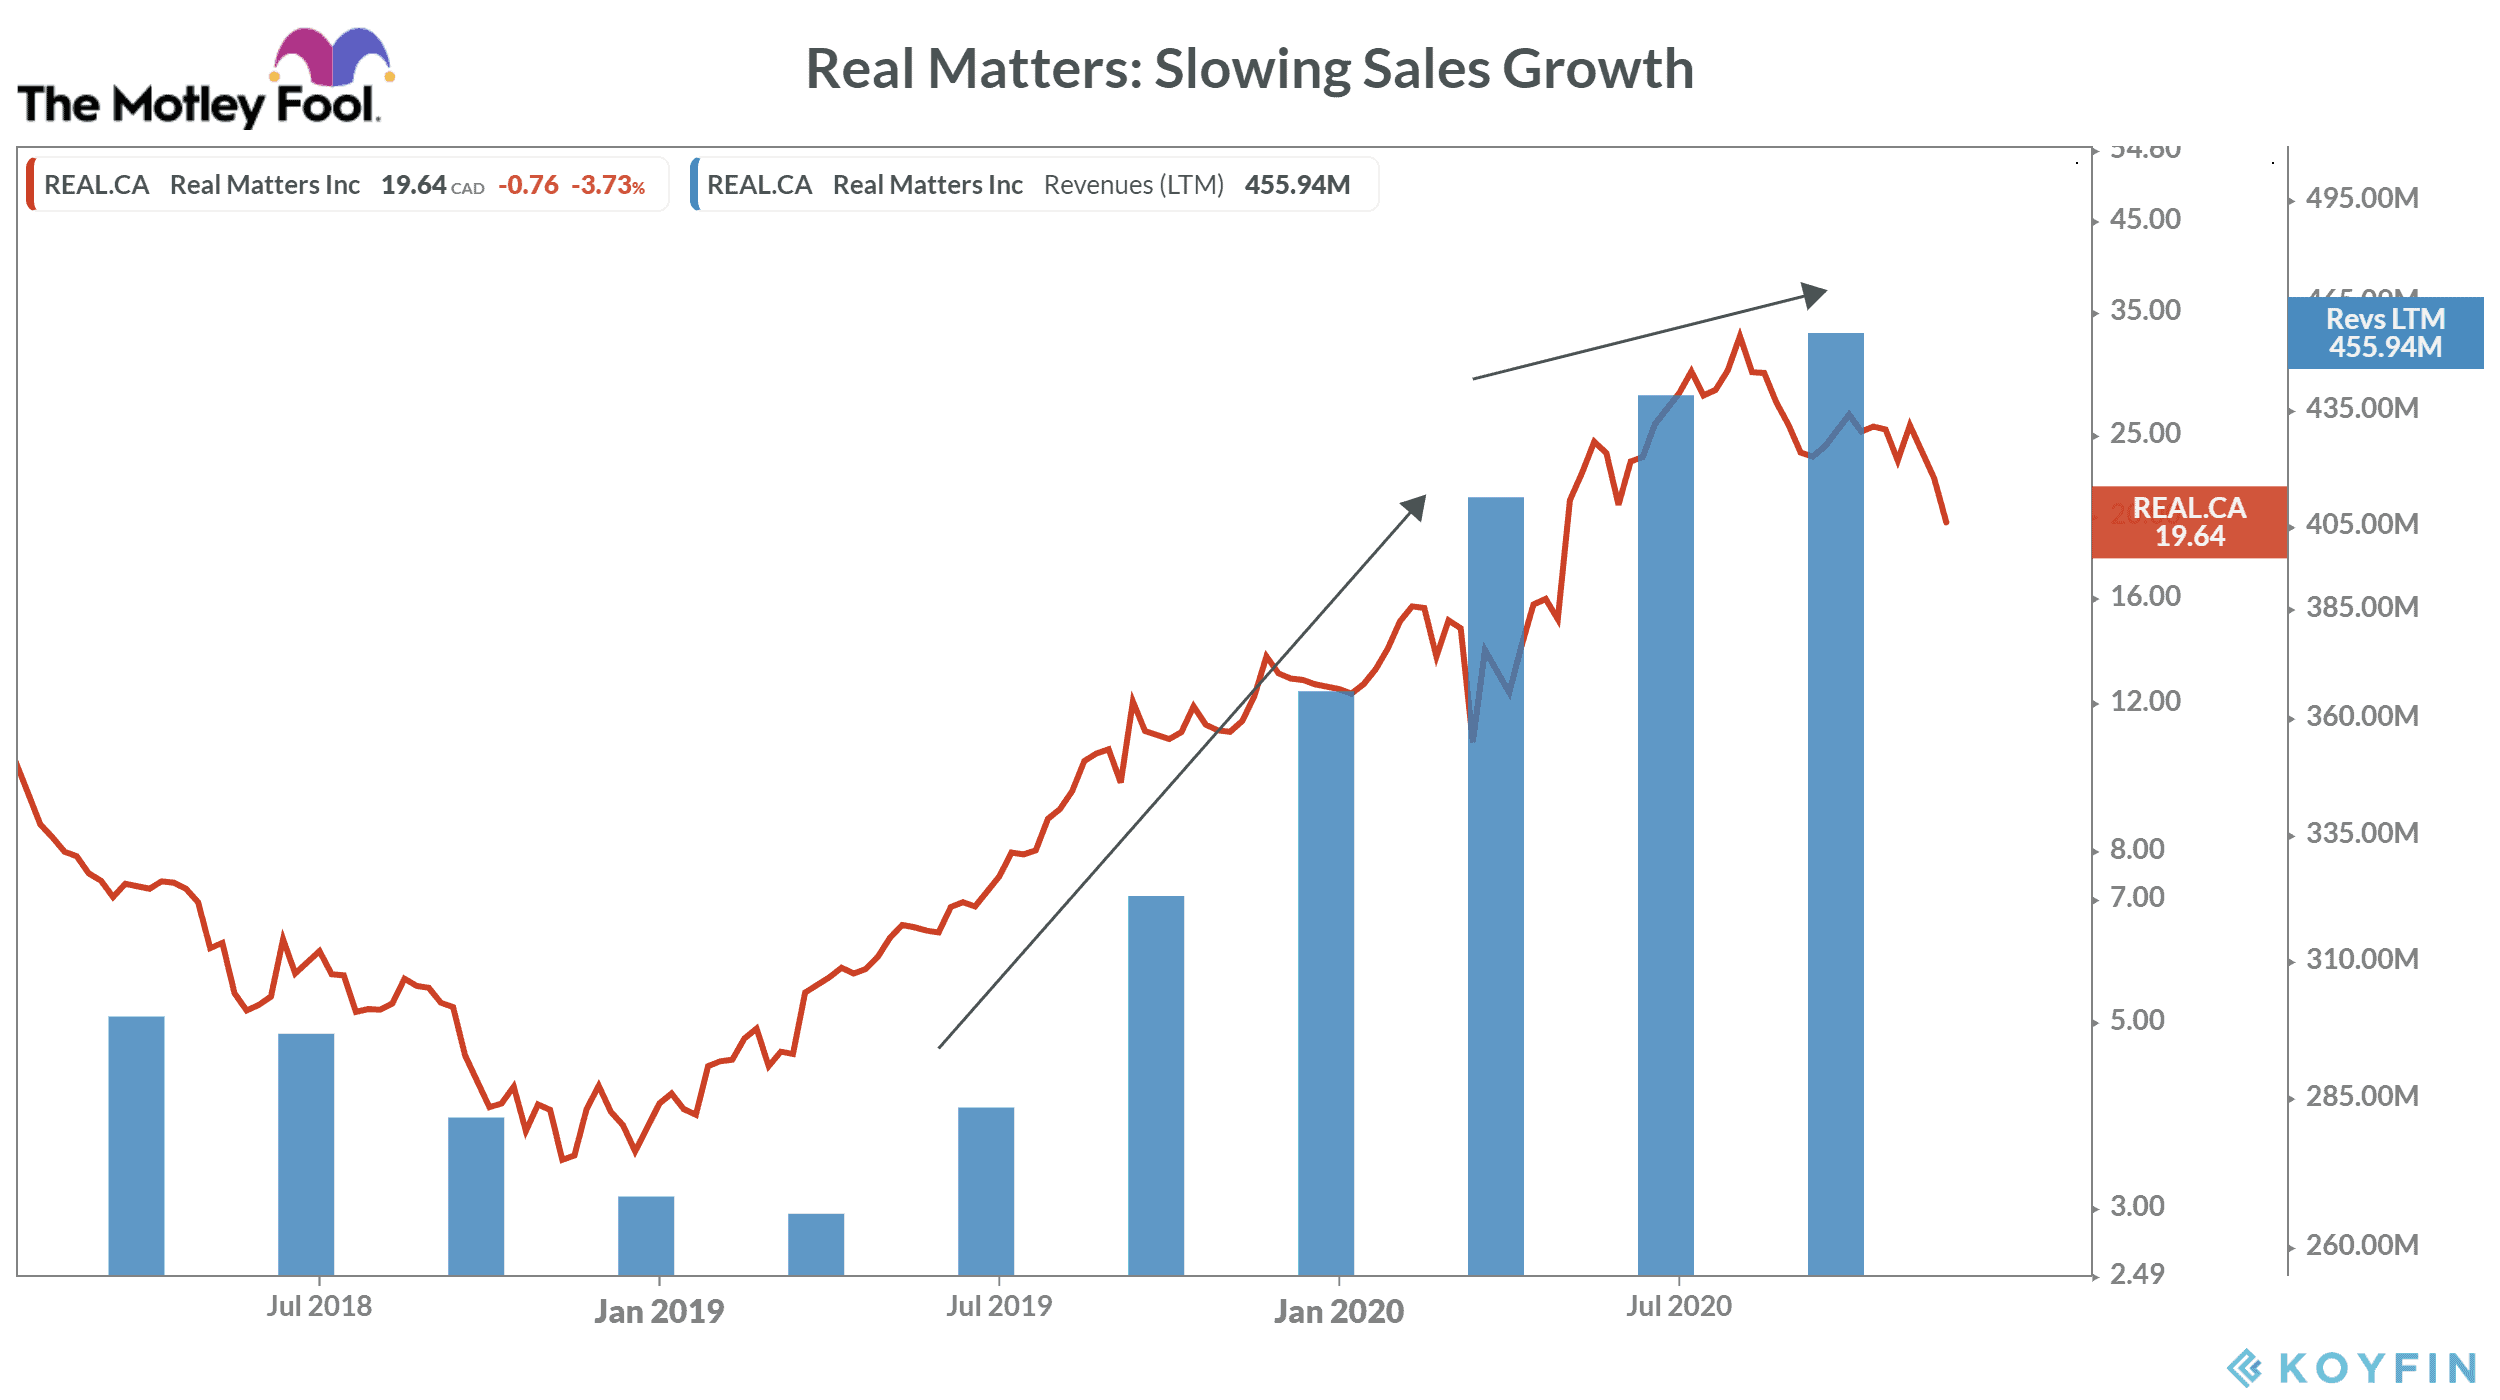 Real Matters sales growth